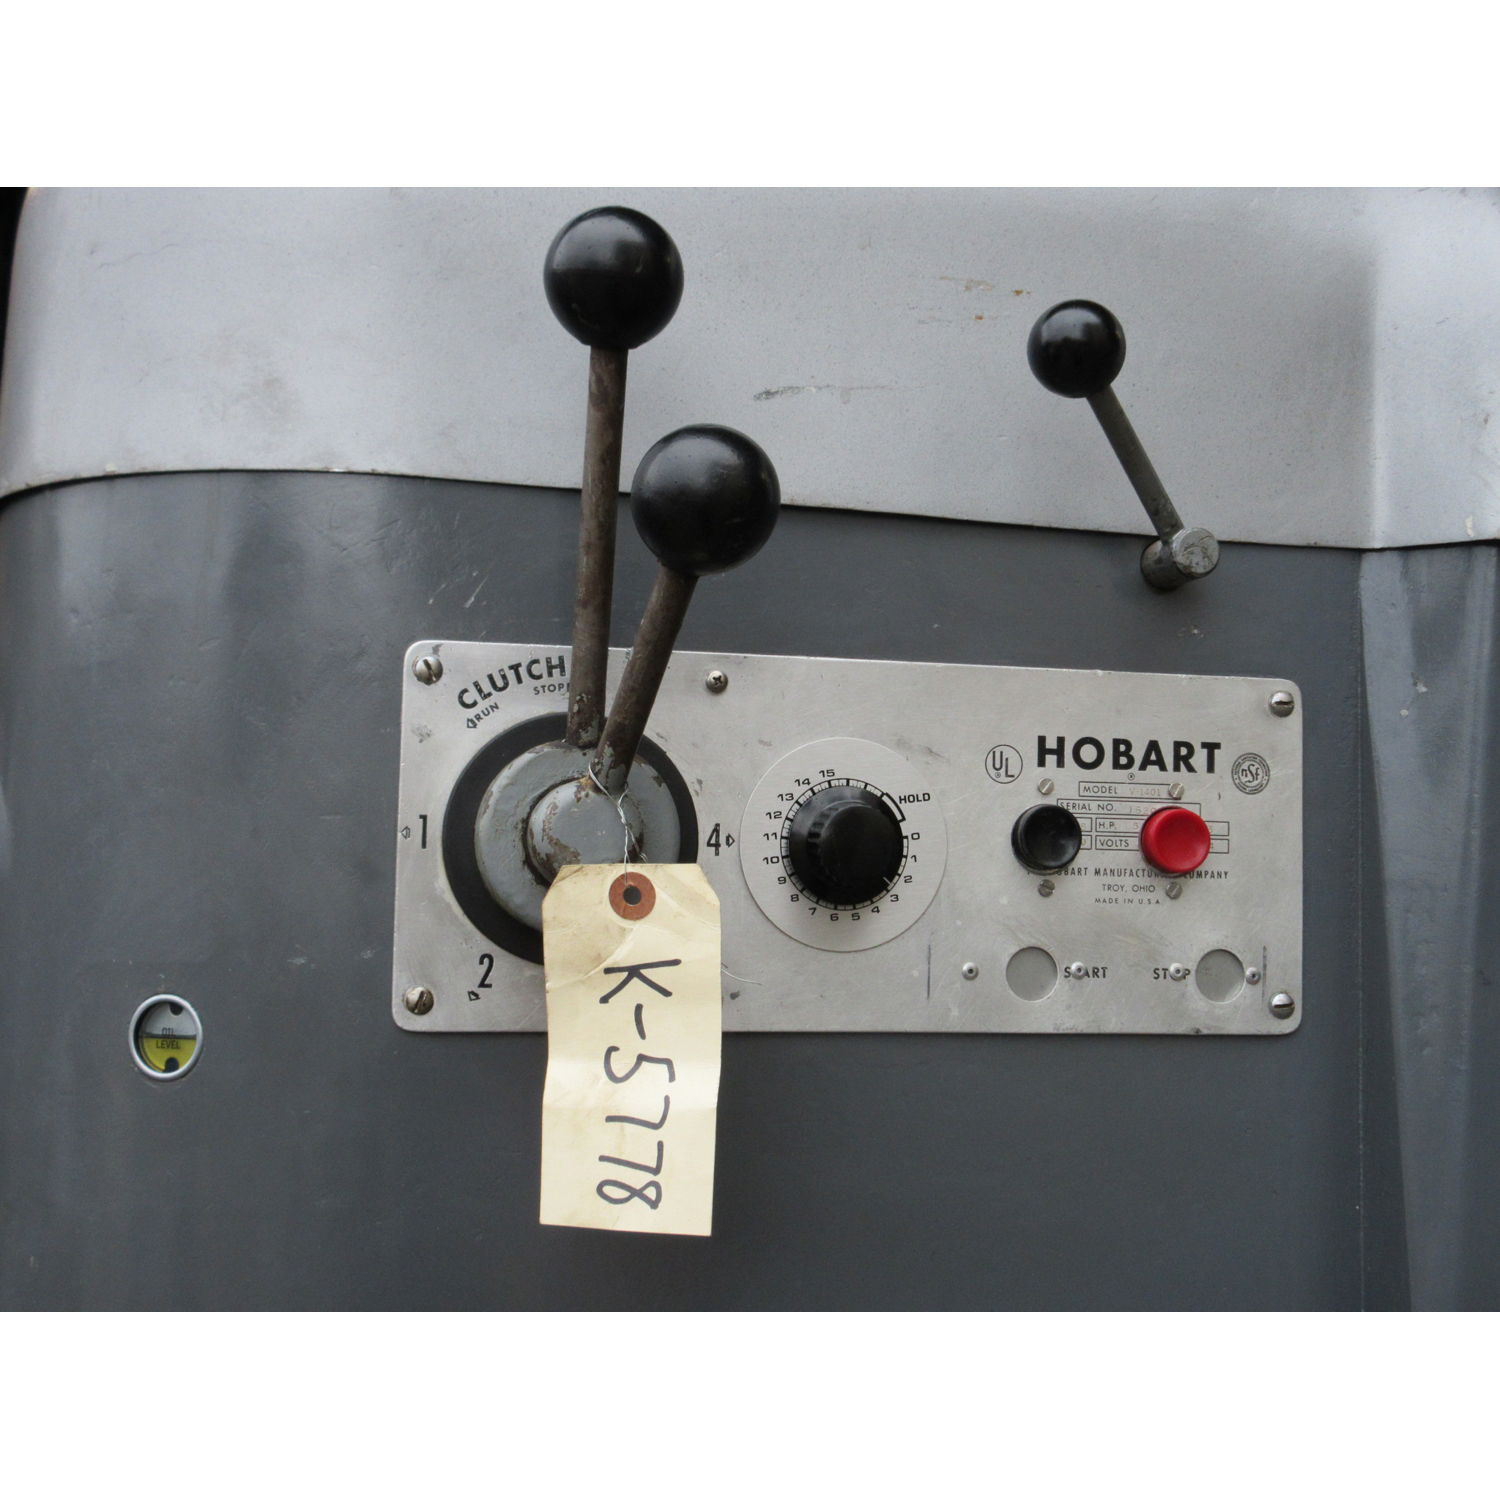 Hobart 140 Quart V1401 Mixer, Used Excellent Condition image 1